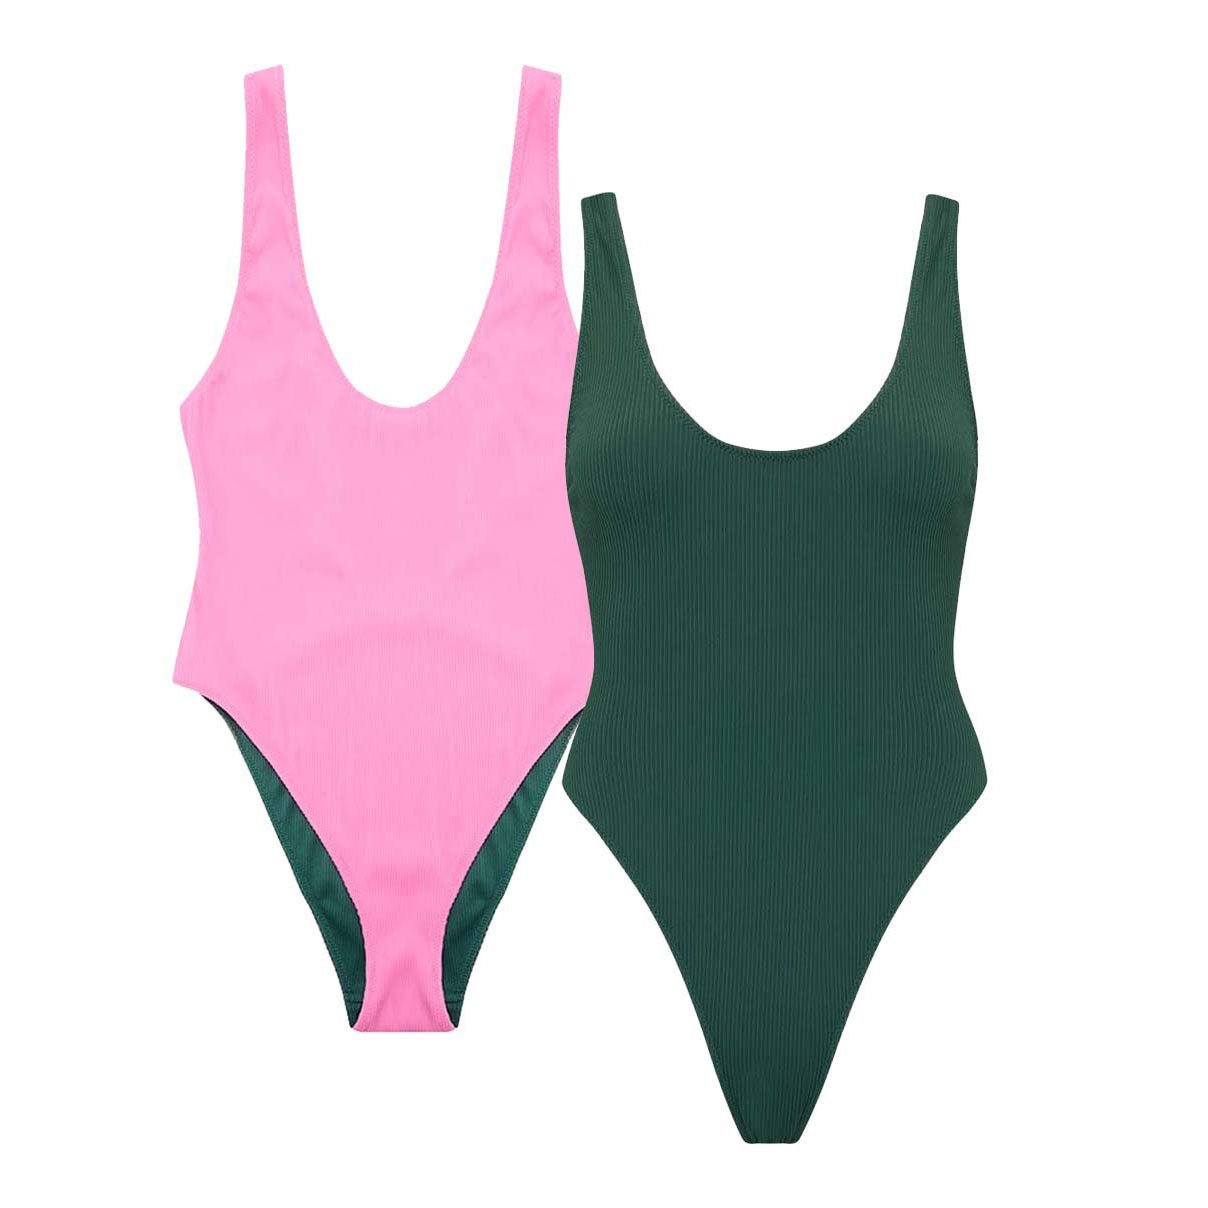 These Swimsuits Are Perfect For Your Next Vacation